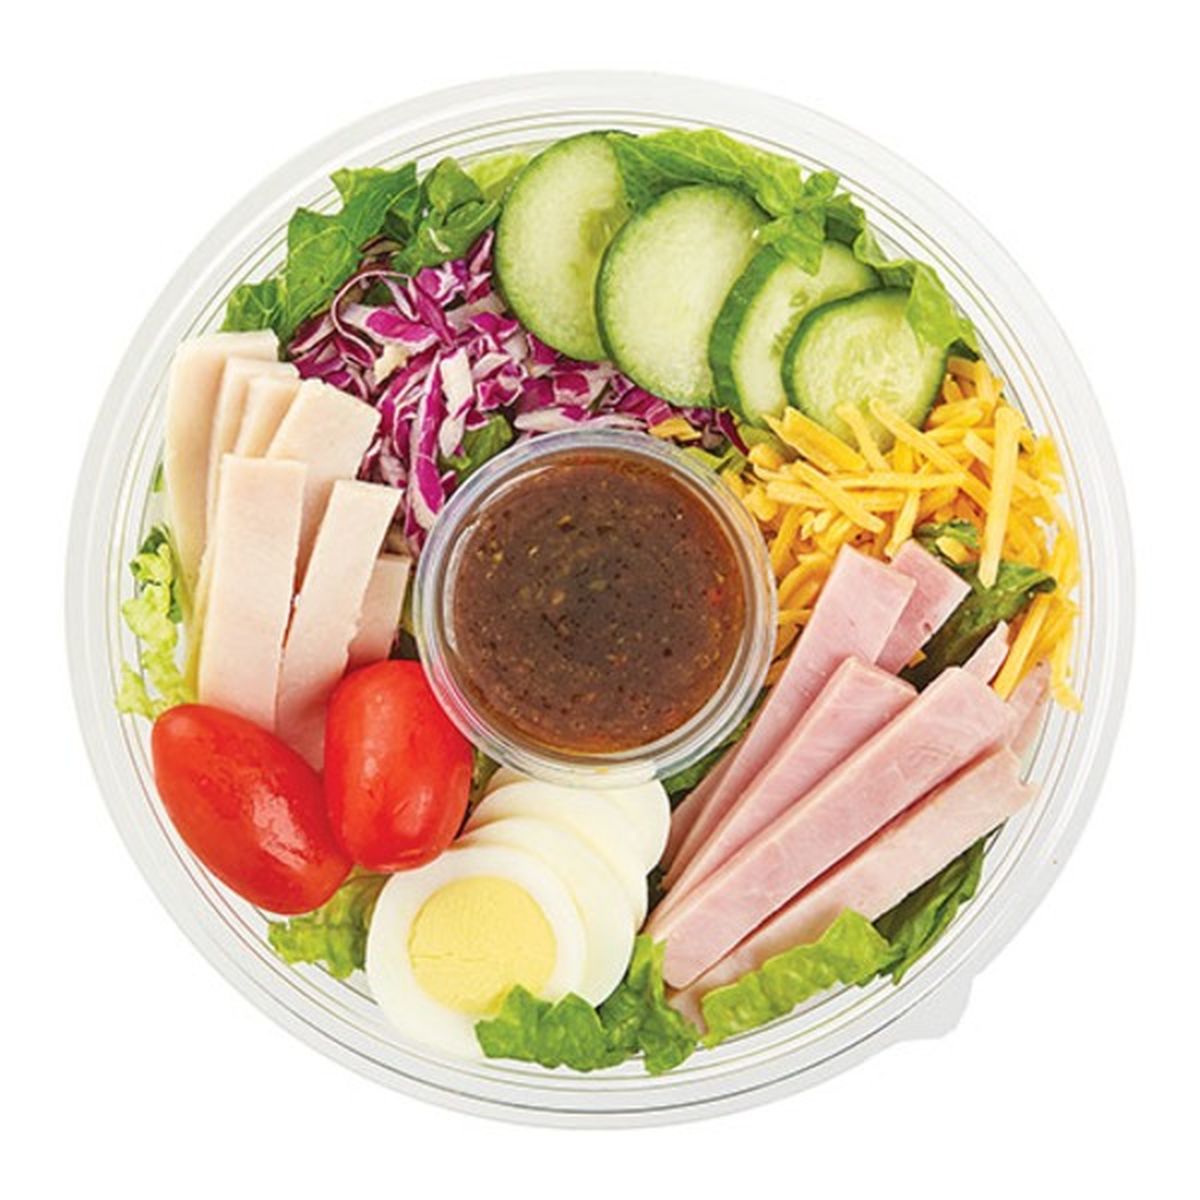 Calories in Wegmans Large Chef Salad with Balsamic Vinaigrette